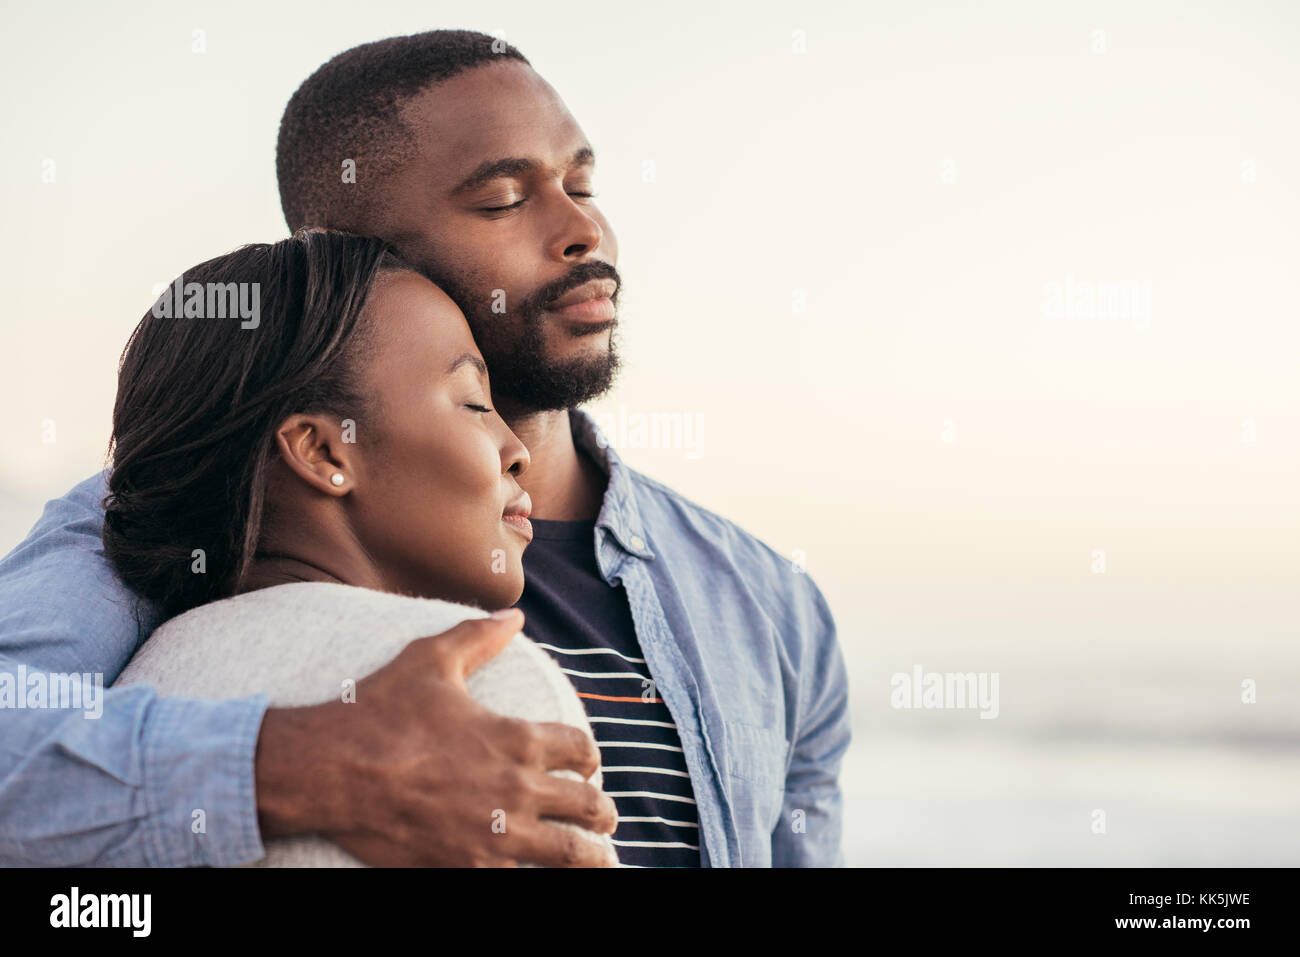 Content African couple standing on a beach hugging each other Stock Photo